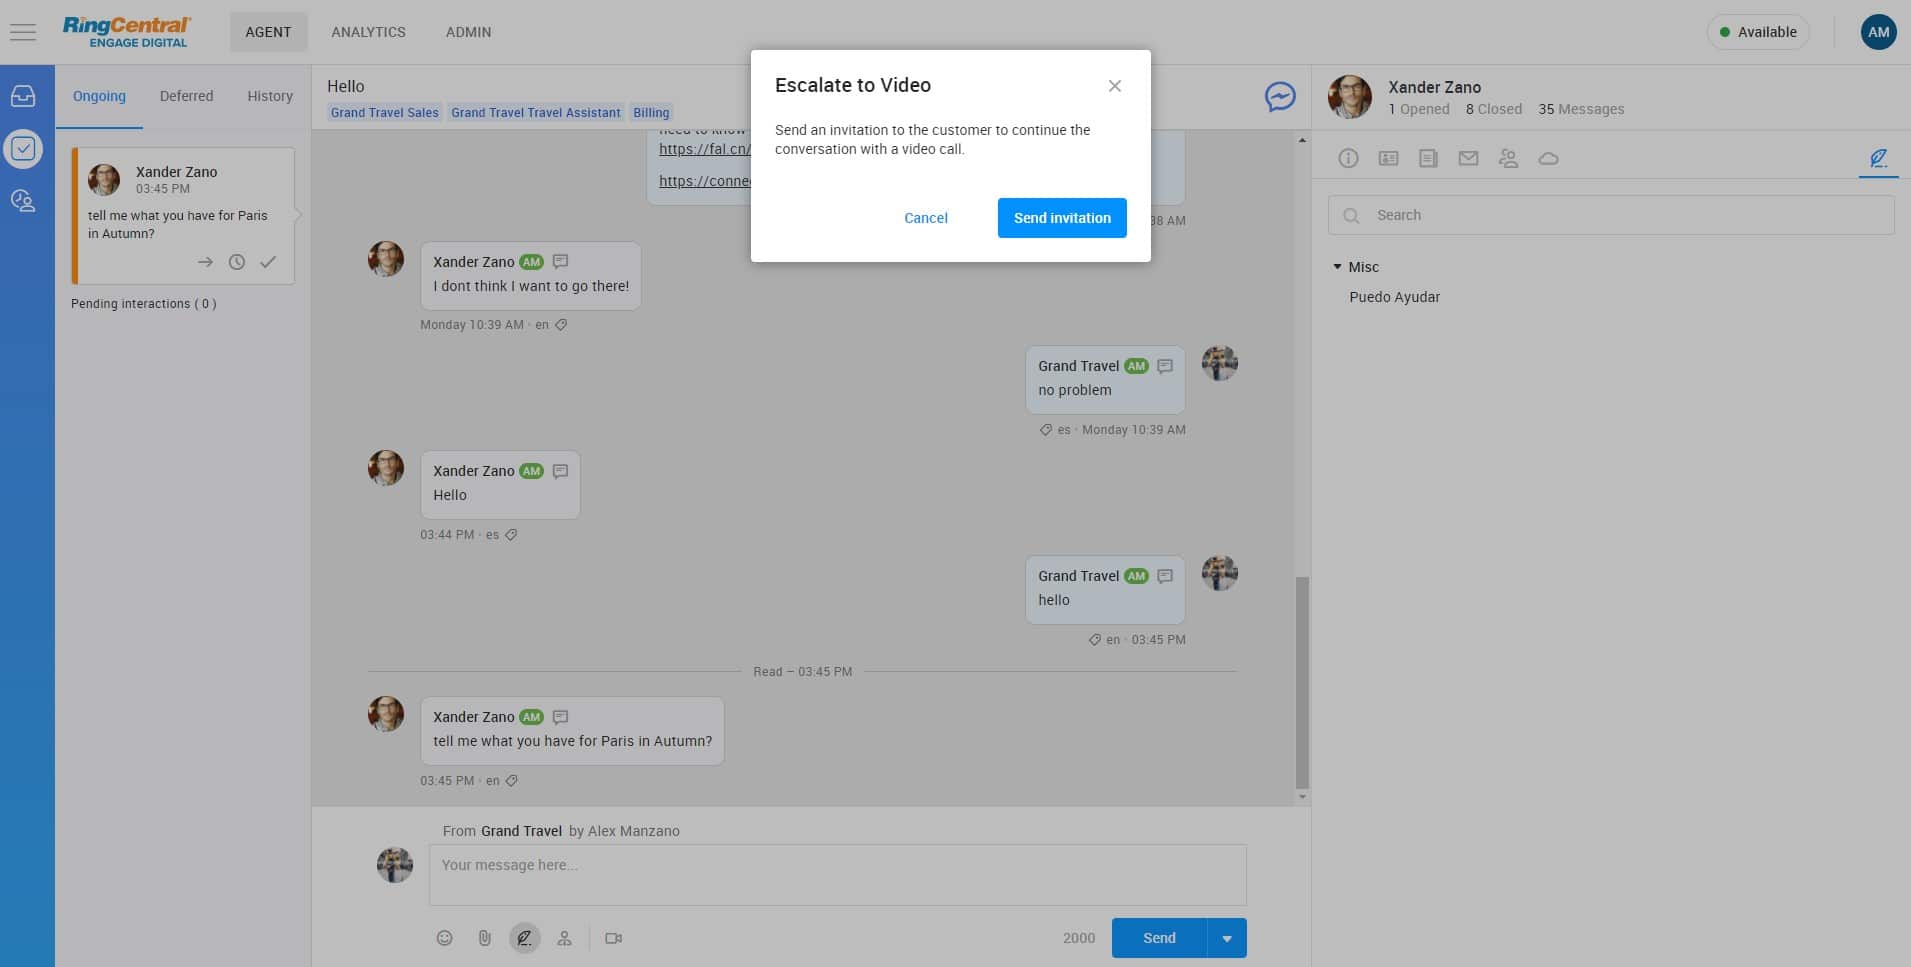 Escalate your customer engagement experience using video chat. Demo shows a chat and a pop up asking to video chat.